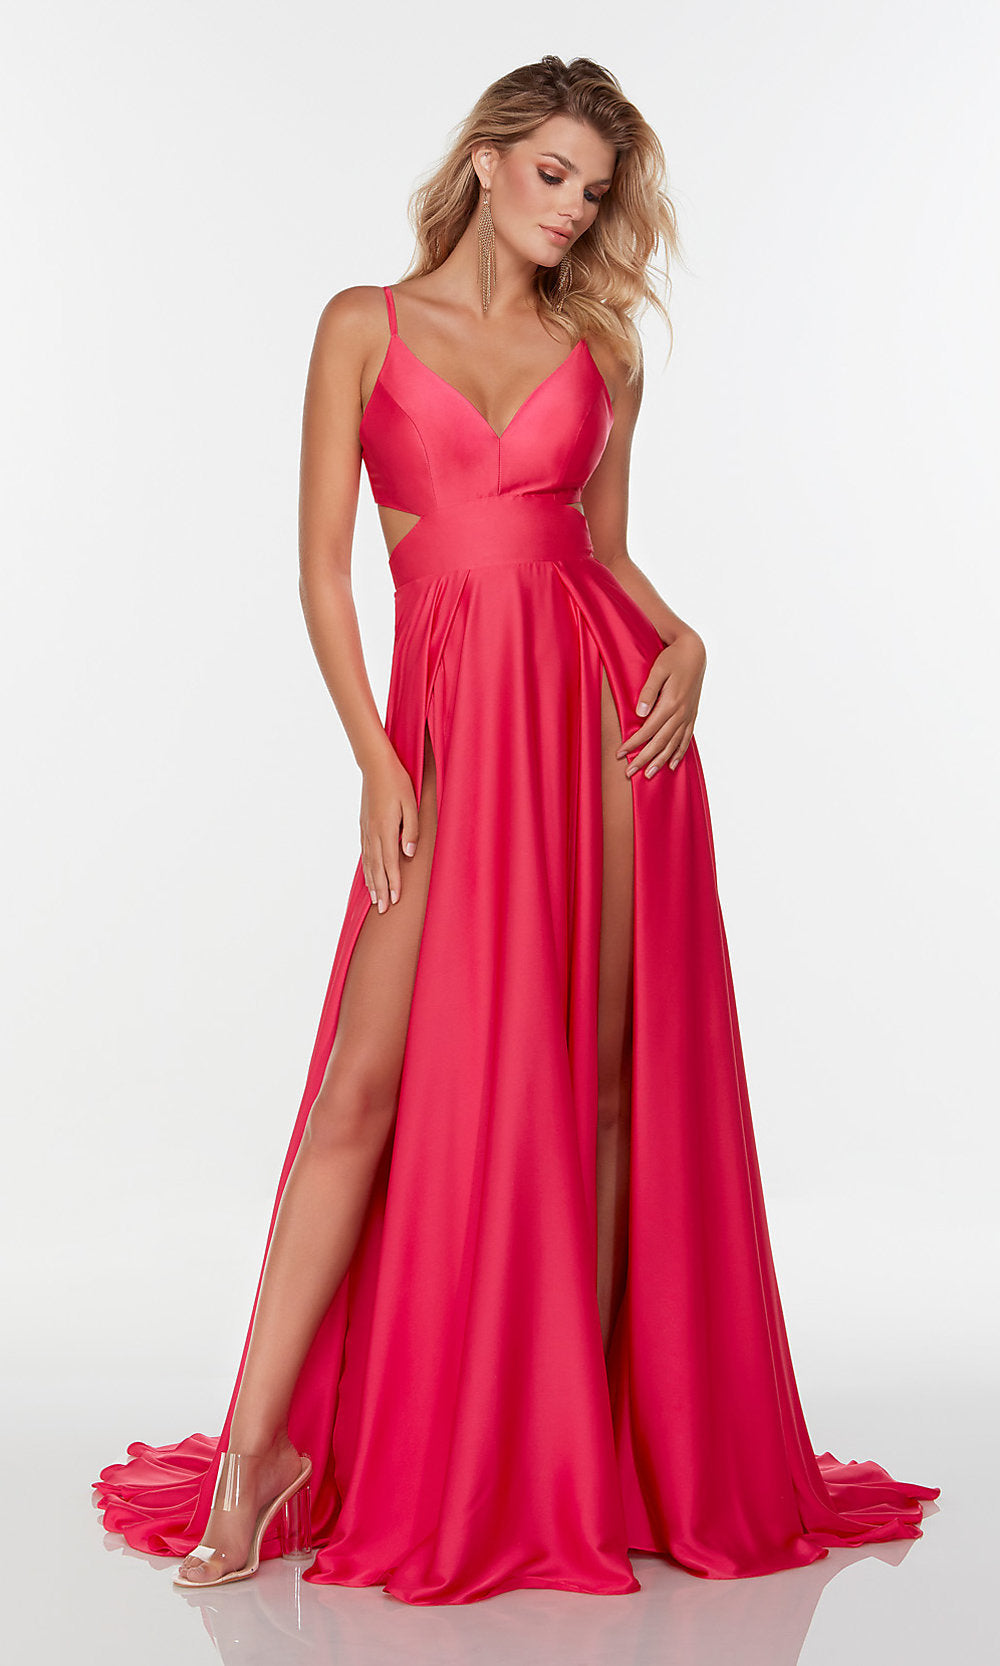  Alyce Hot Pink Long Prom Dress with Double Slits